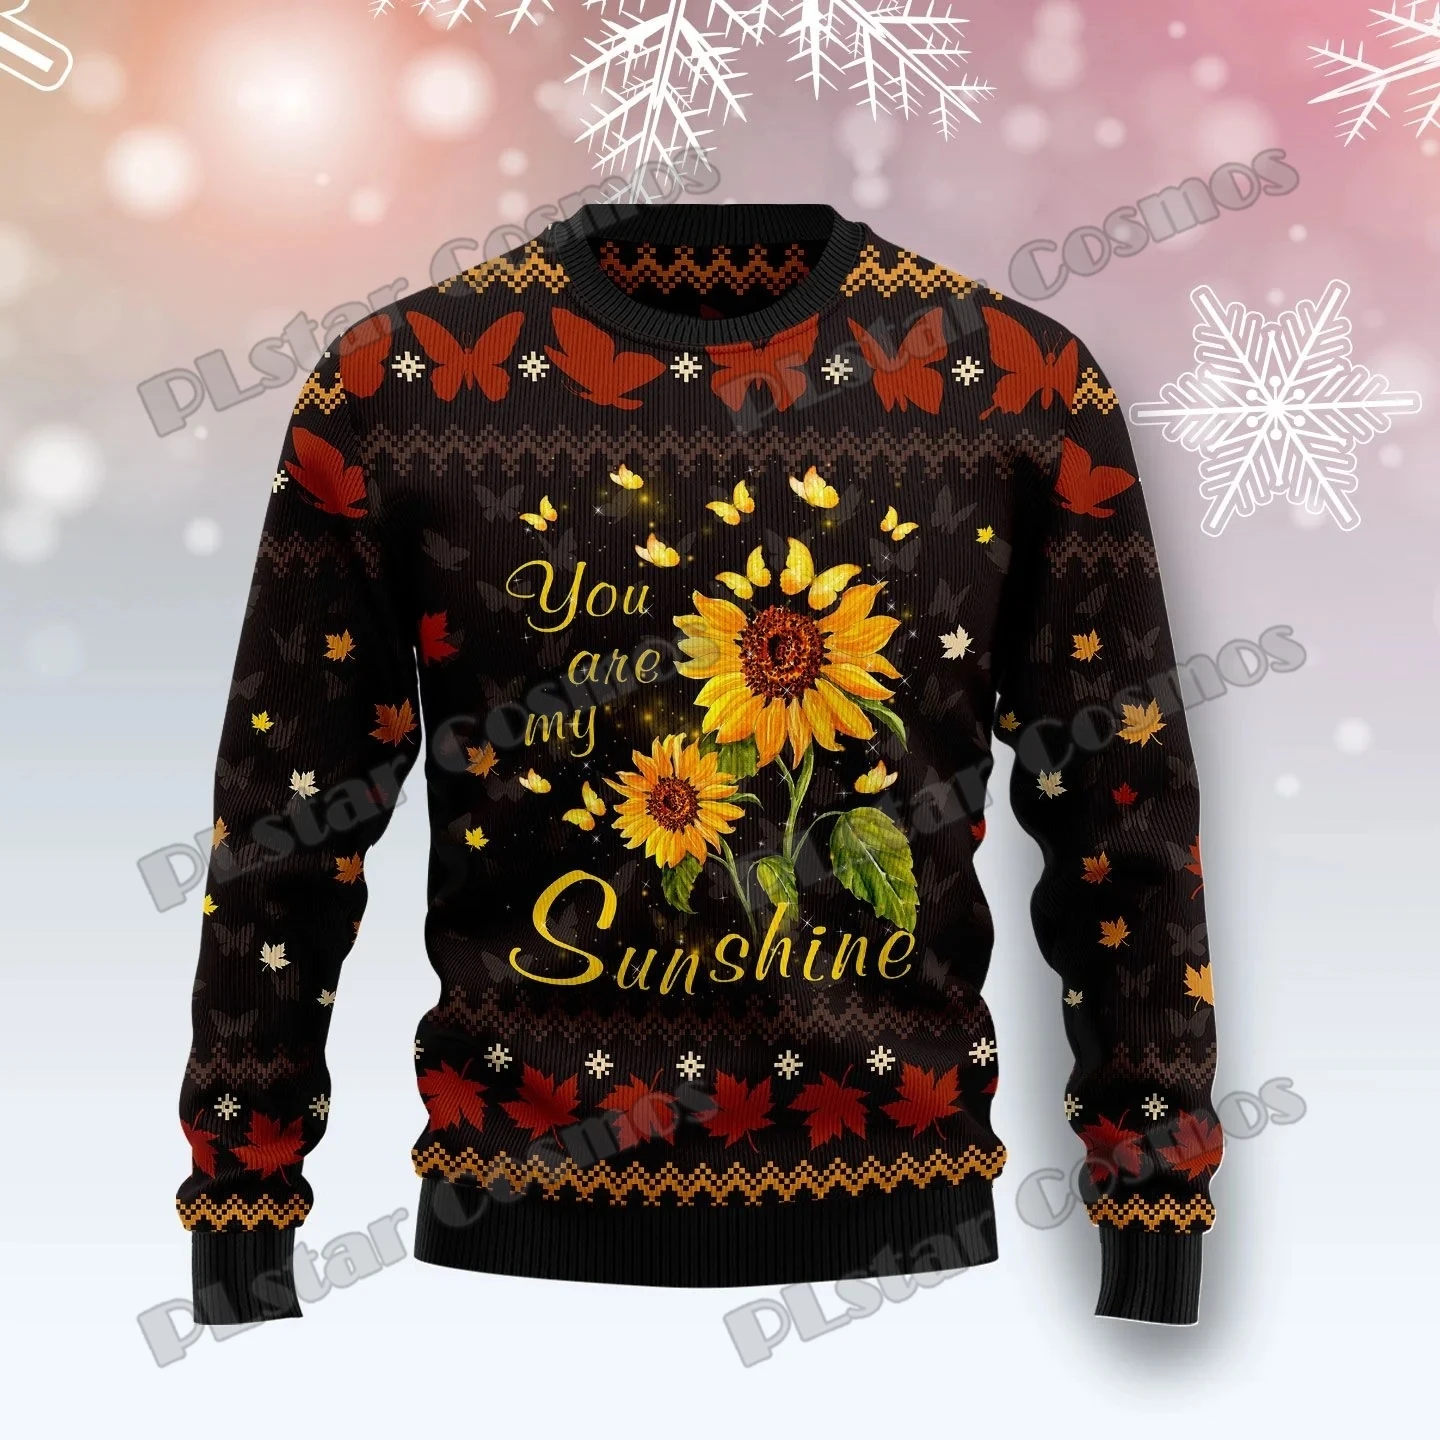 PLstar Cosmos Butterfly Sunshine 3D Printed Fashion Men's Ugly Christmas Sweater Winter Unisex Casual Knitwear Pullover MYY31 plstar cosmos 3d printed horse hobby animal fashion sweatshirt casual zipper hoodie fun jacket unisex clothing style 18